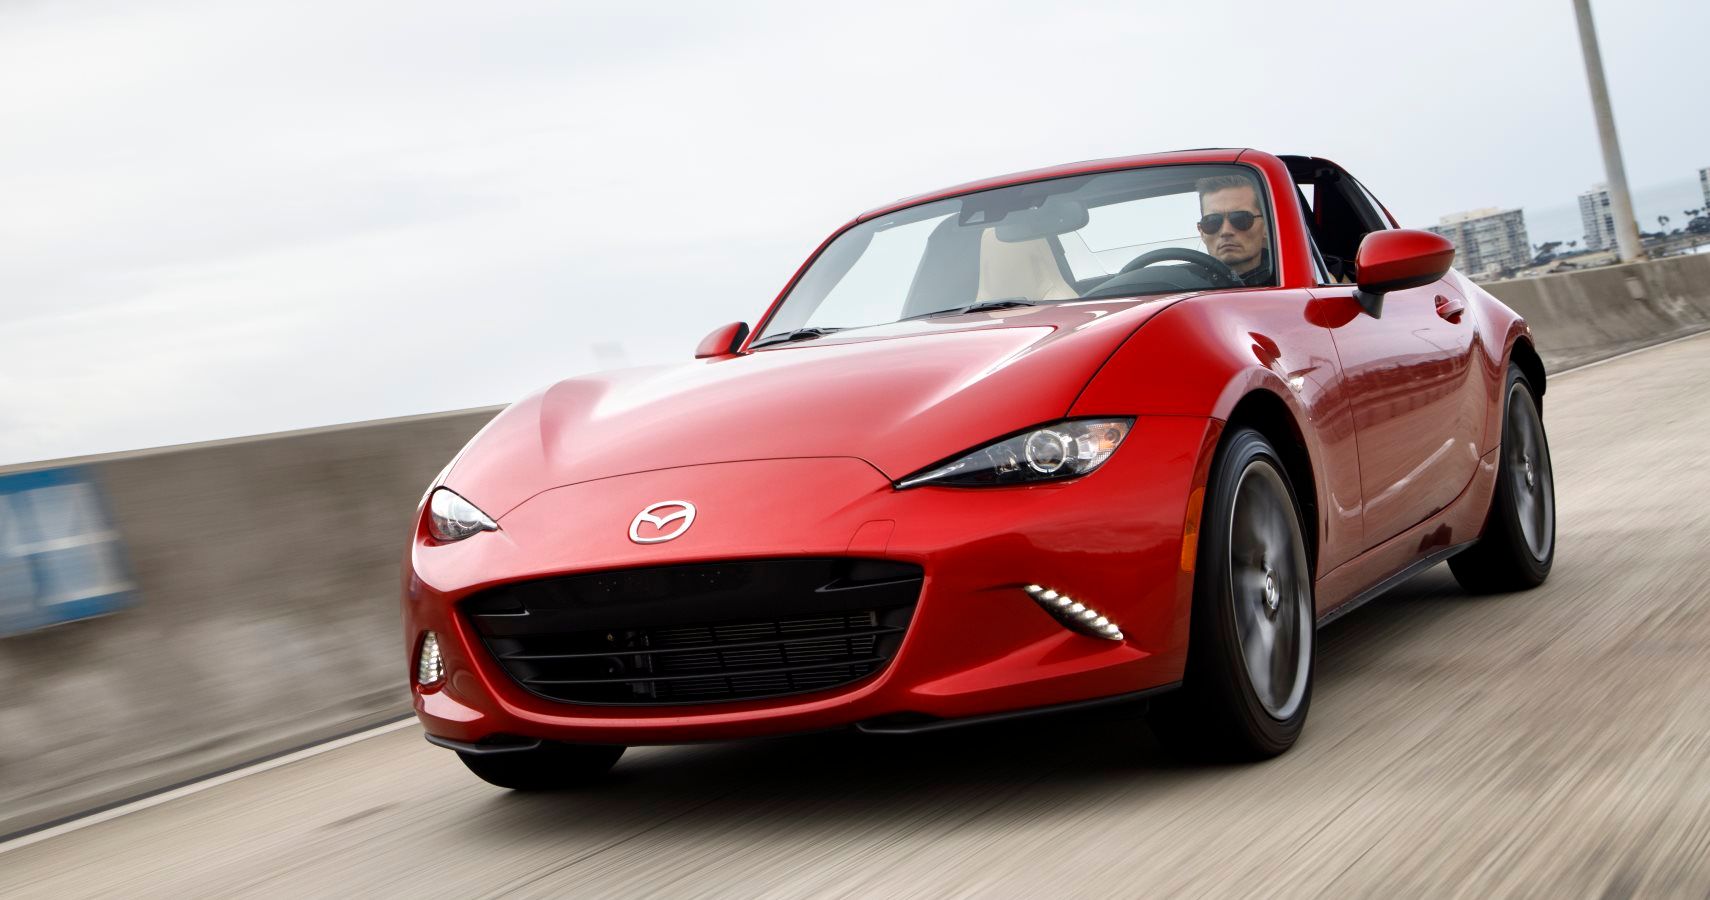 Review: Mazda MX-5 RF - The Affordable Roadster